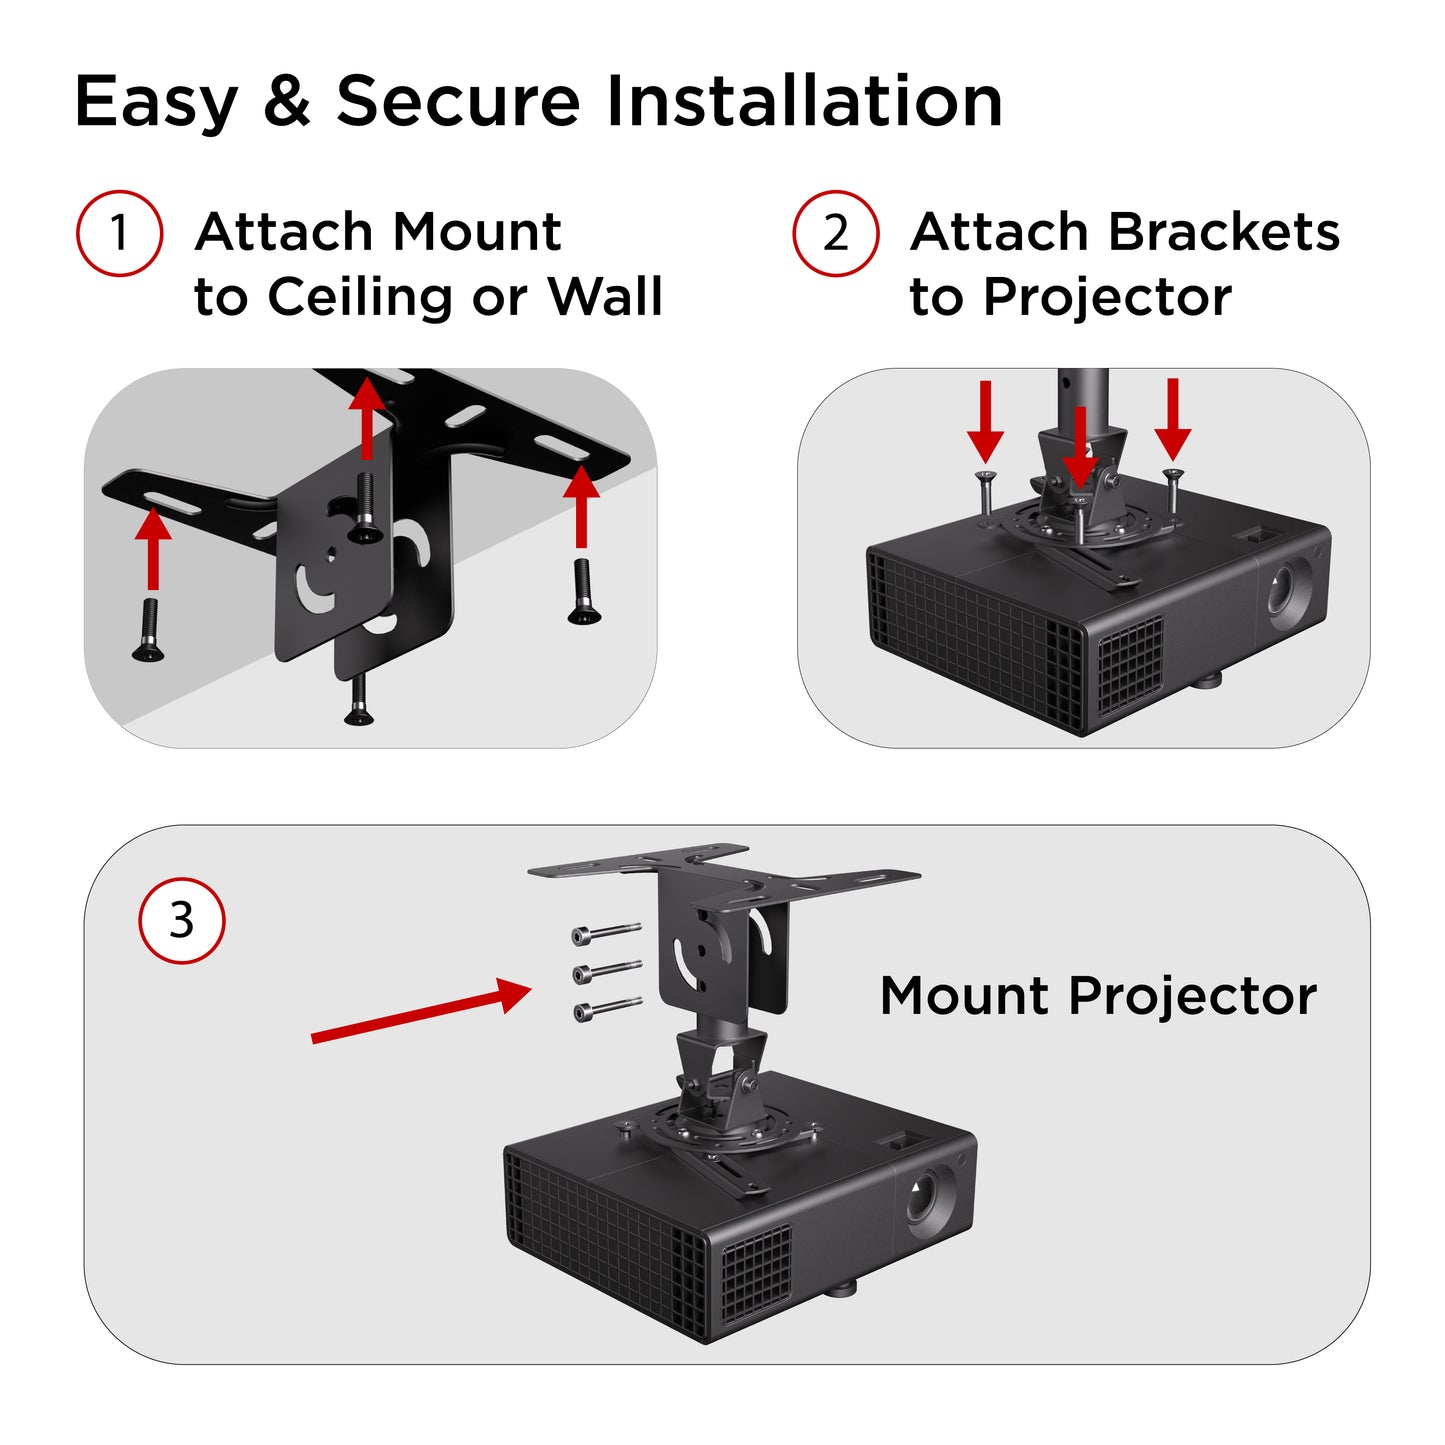 ProMounts Universal Overhead Ceiling Projector Mount, Holds Up to 44lbs (UPR-PRO150)